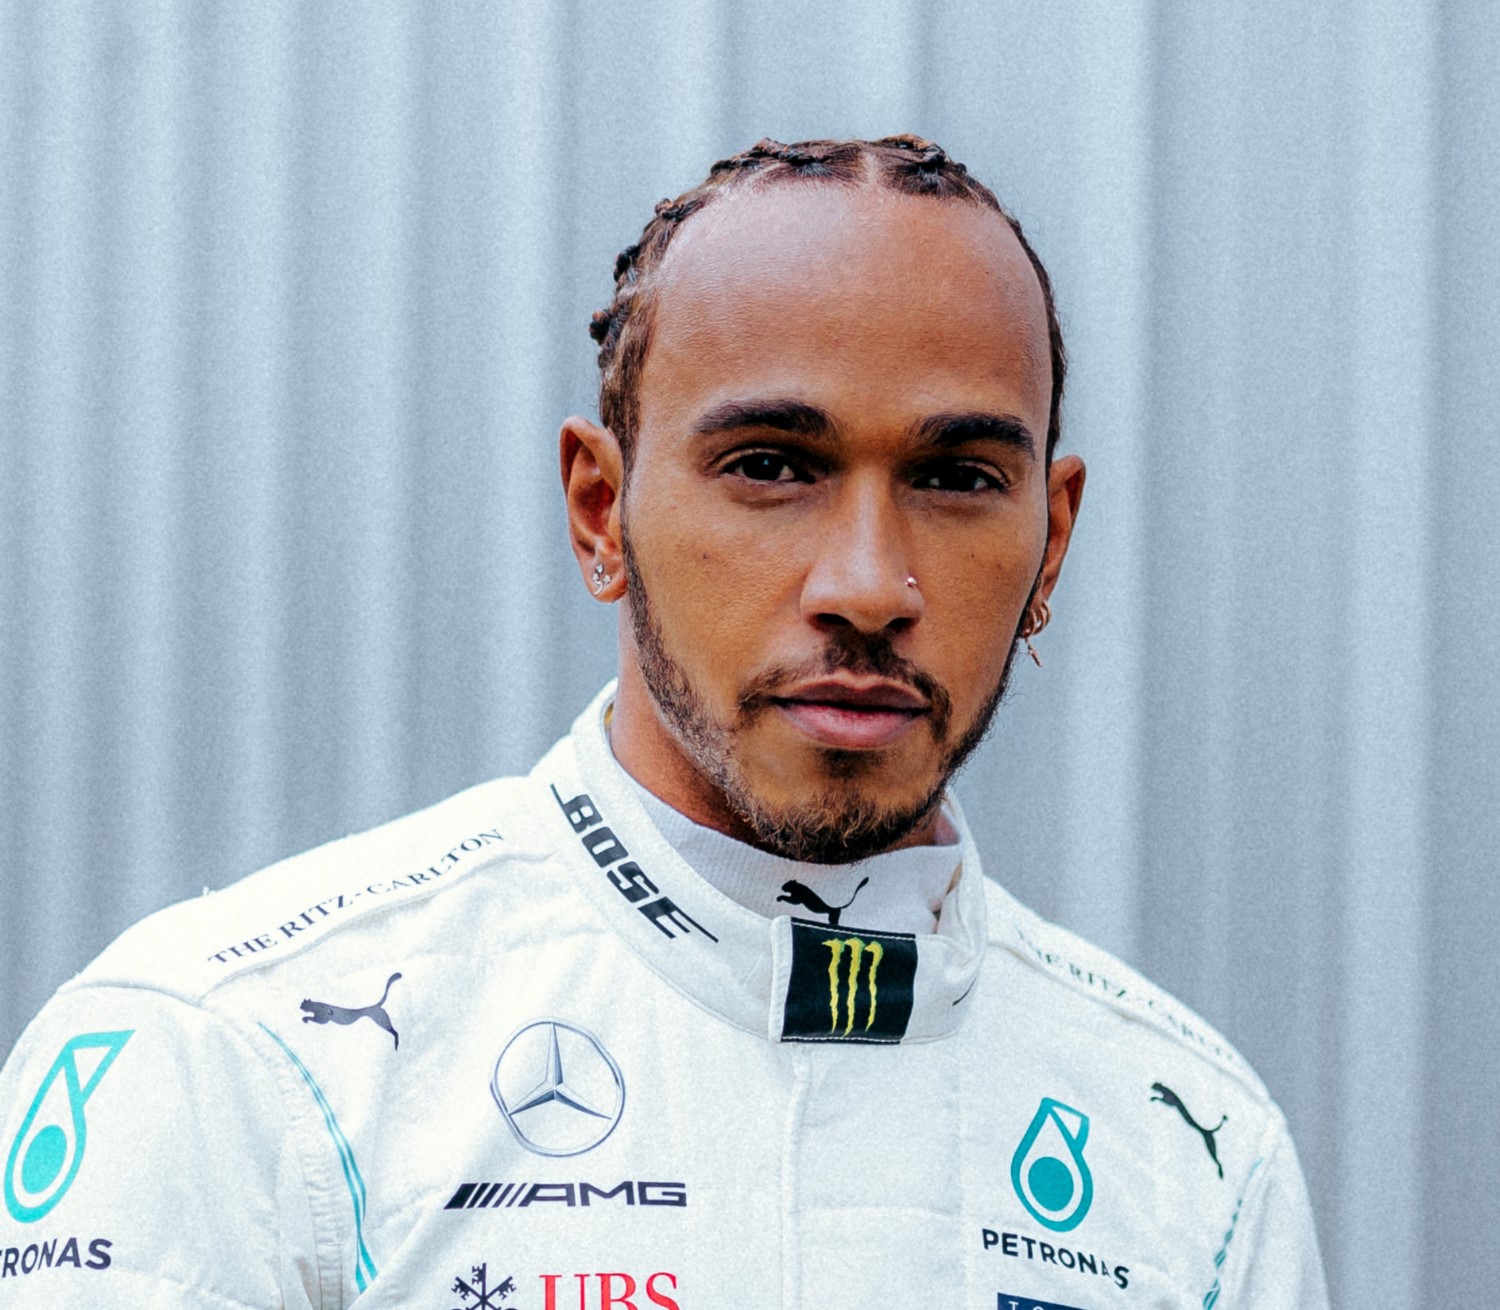 Lewis Hamilton is guaranteed the world titles this year and next